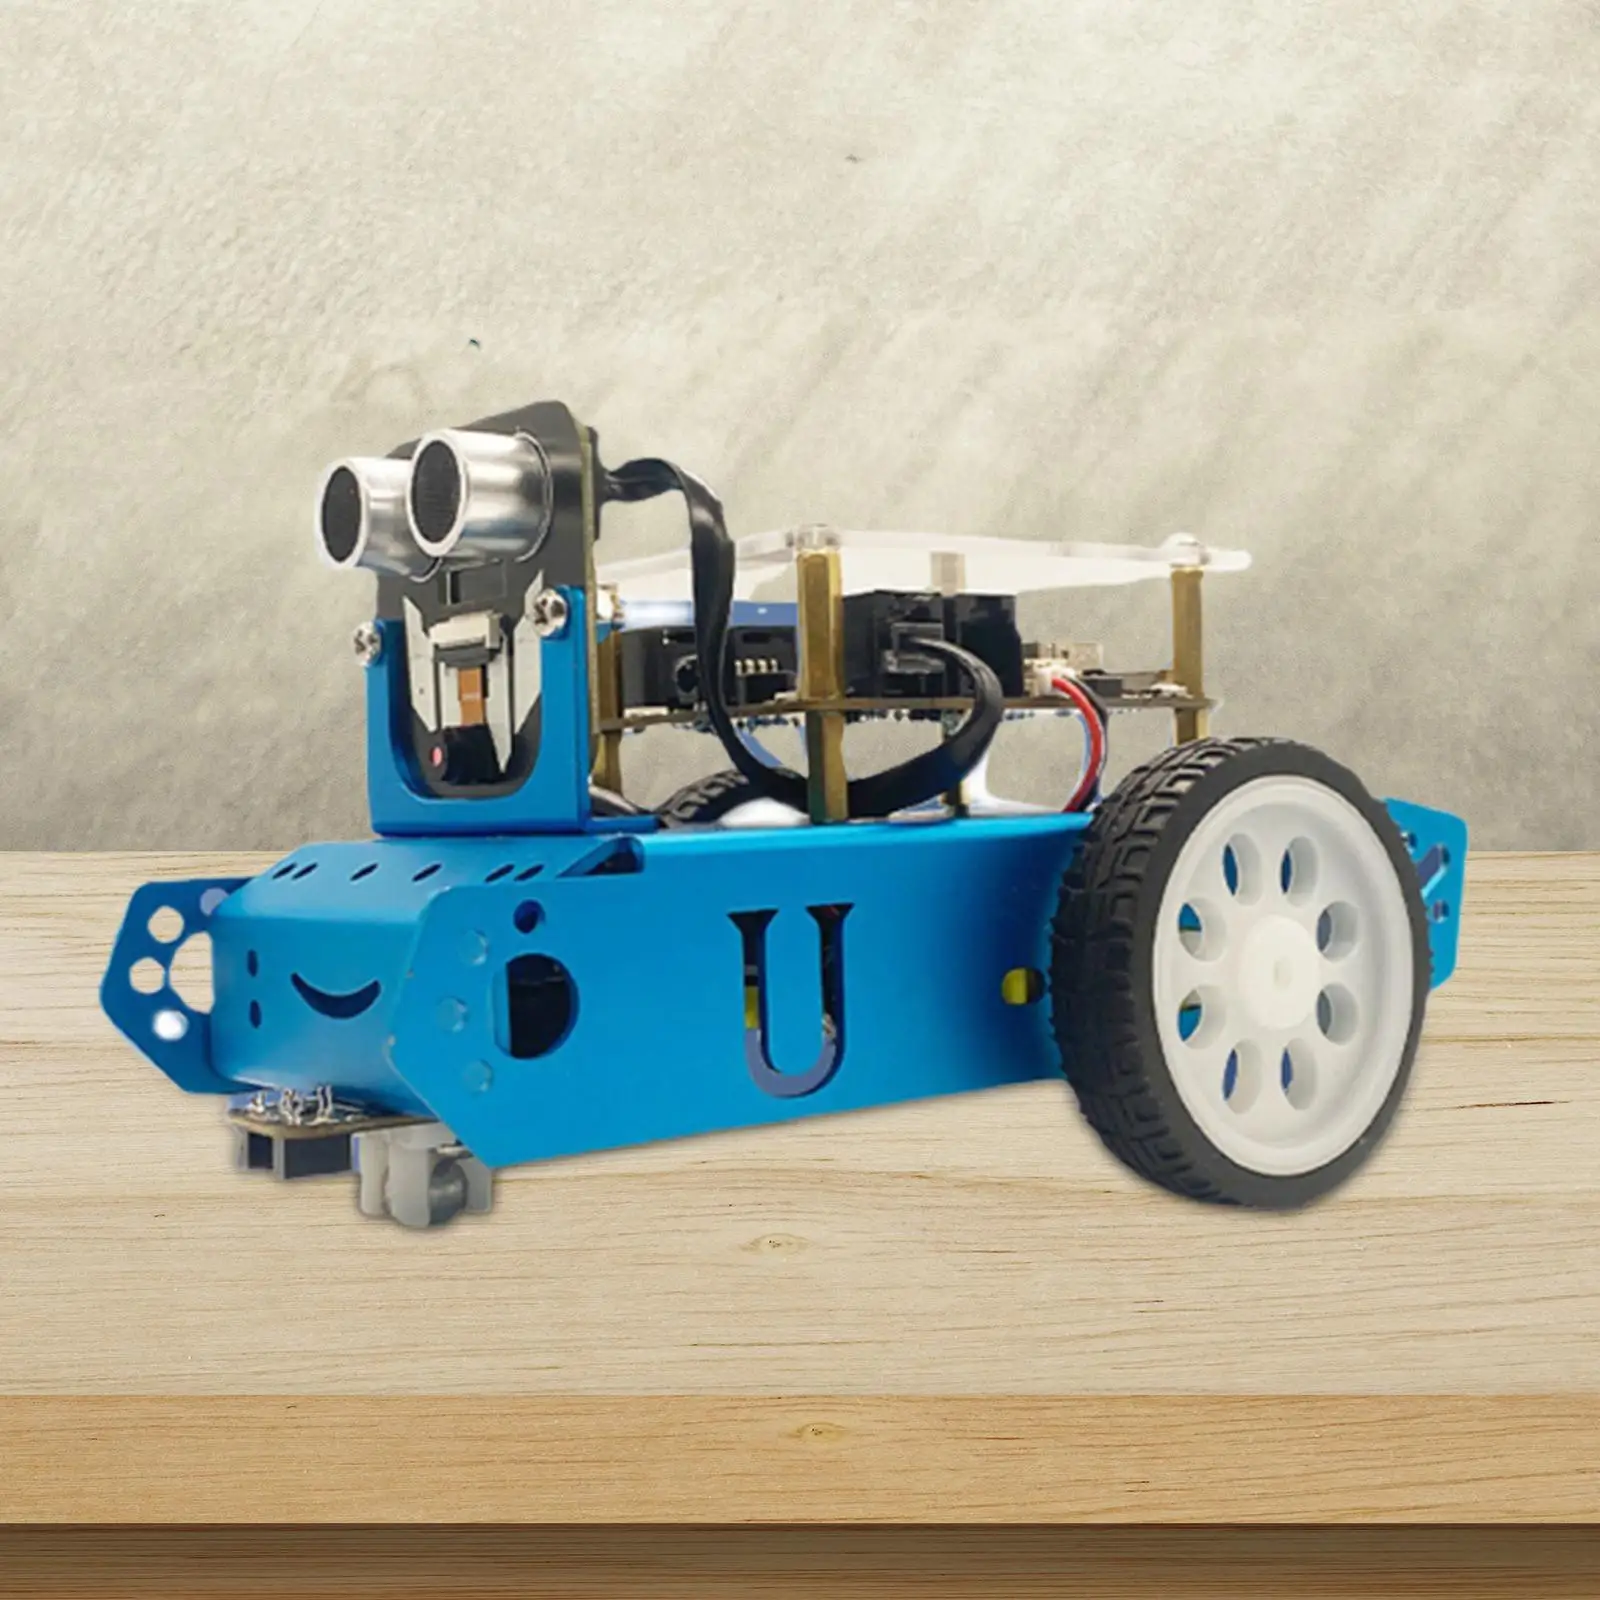 Programming Thrust Robot Coding for Electronic Learning Teaching Aids Logical